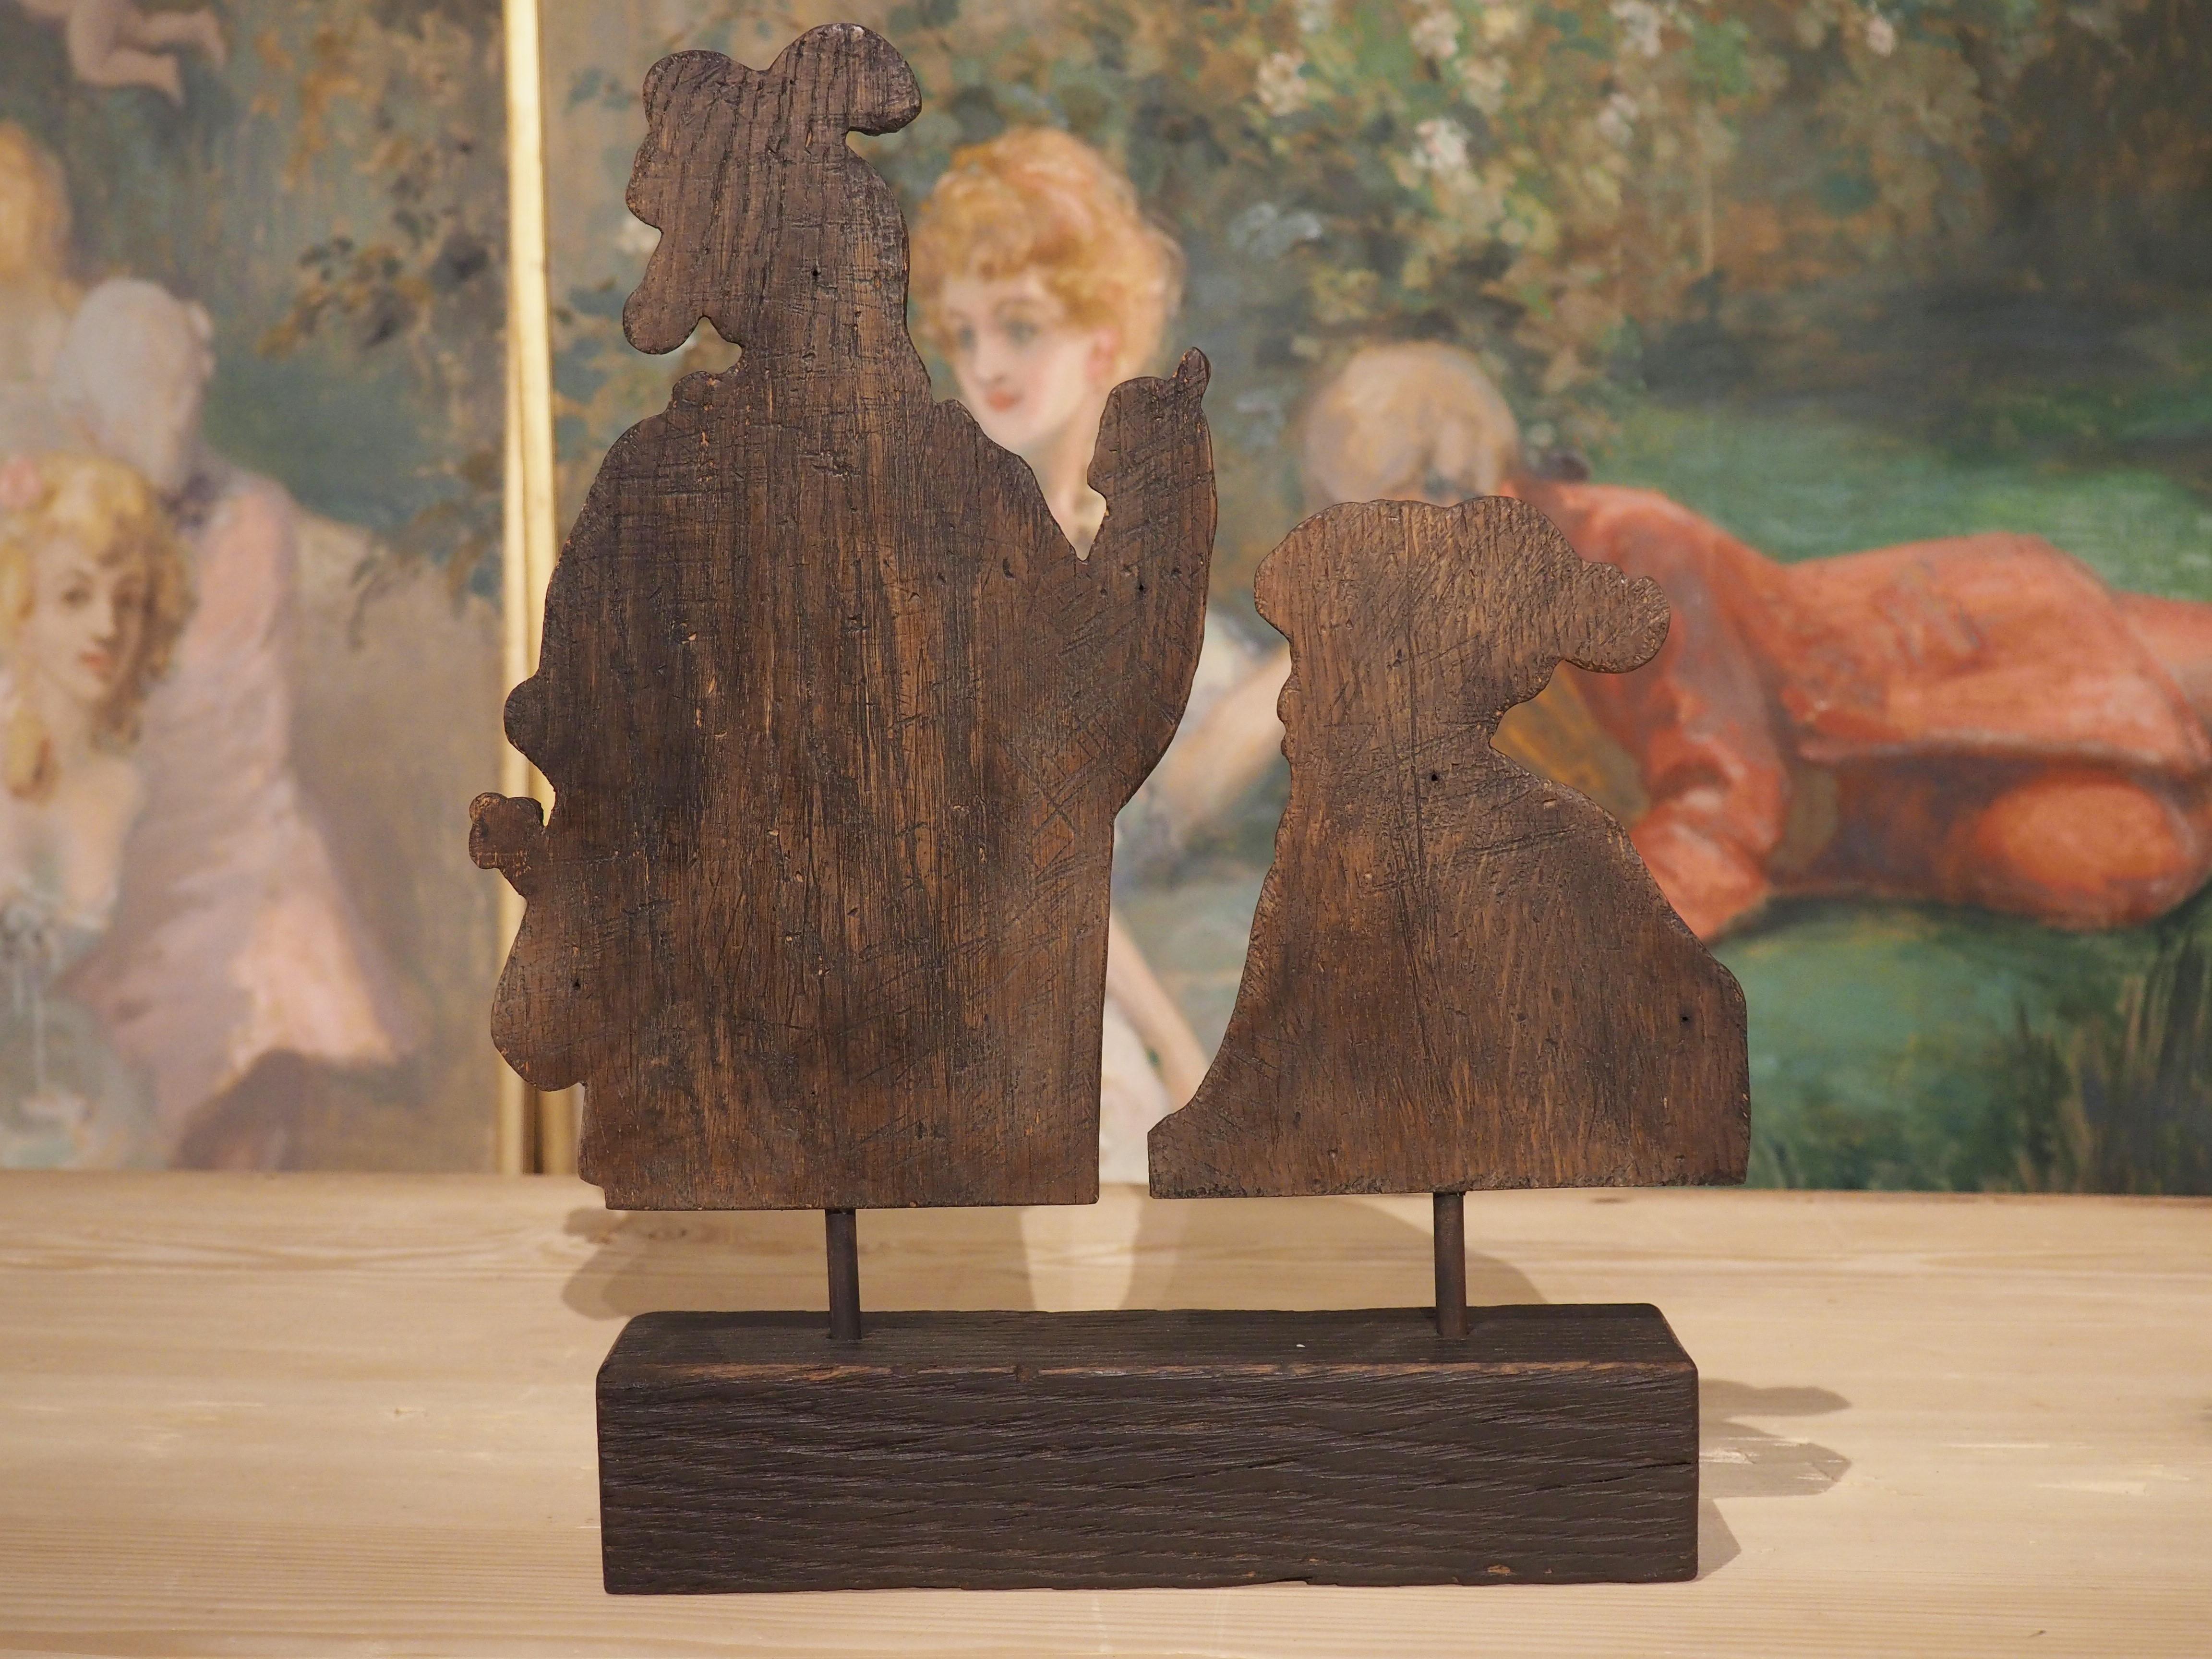 Originally part of a larger, carved presentation from Flanders (circa 1800), this pair of oak soldiers have been mounted to a two and a half tall block with a dark finish. The patina of the soldiers is a combination of brown and tan, making the